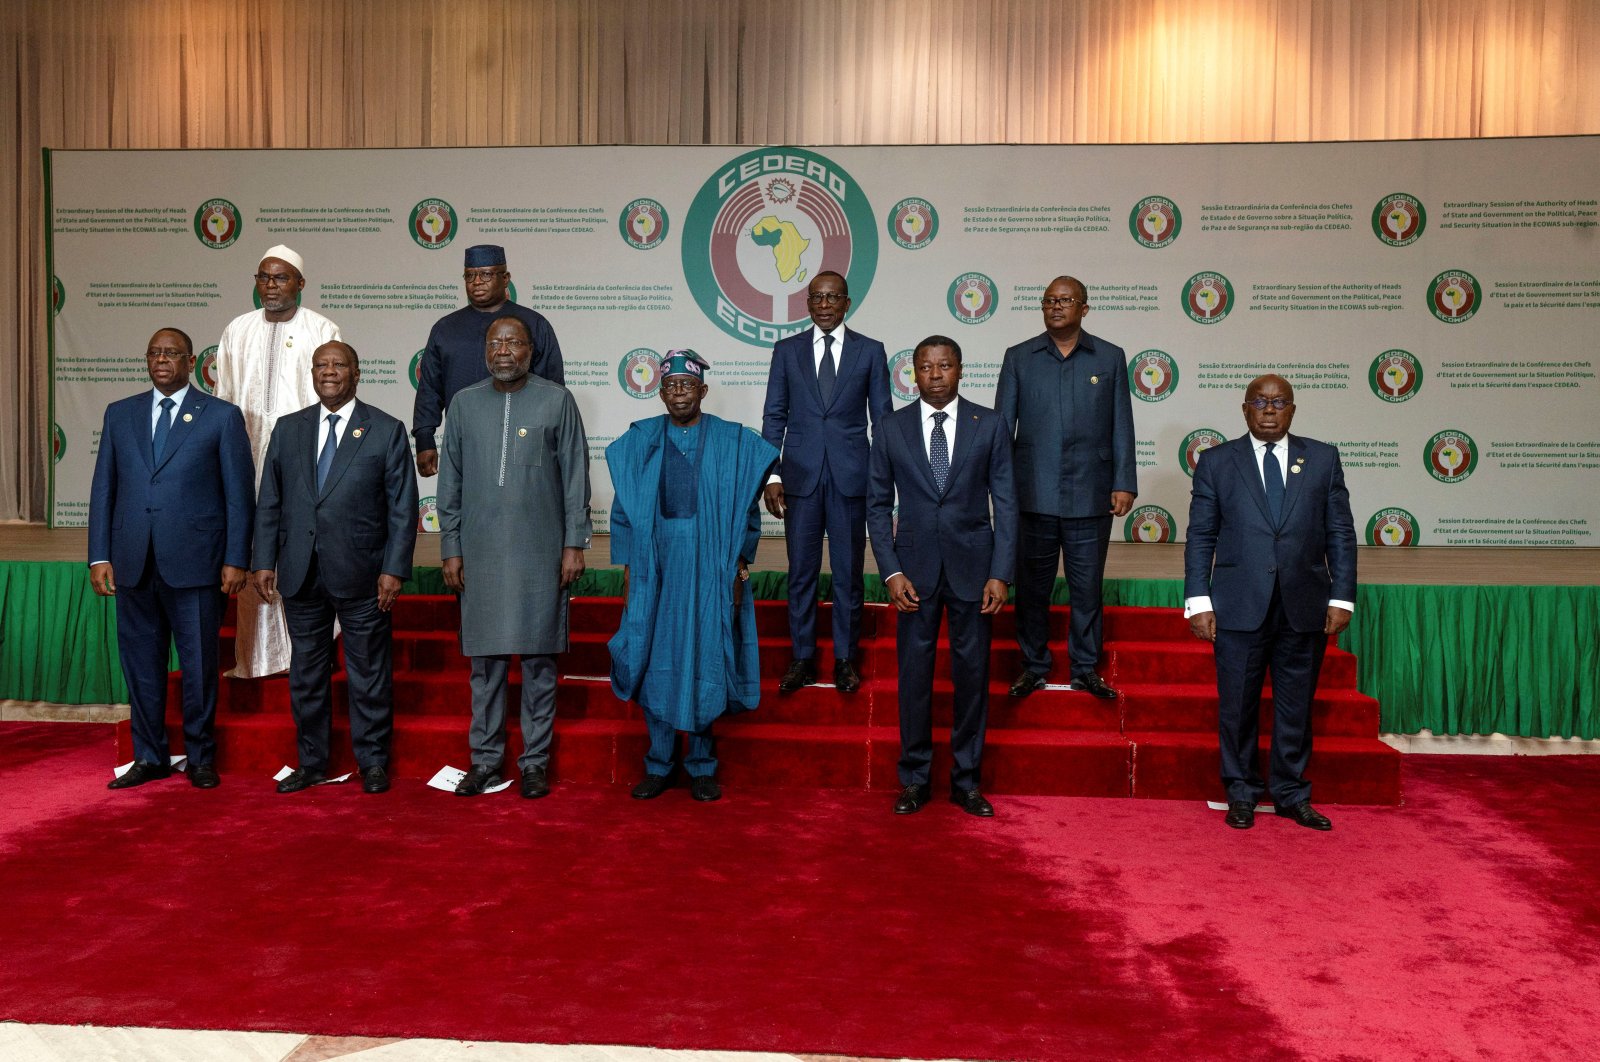 Leaders pose for a photo before the Economic Community of West African States (ECOWAS) Extraordinary Session of the Authority of Heads of State and Government in Abuja, Nigeria Feb. 24, 2024. (Reuters Photo)